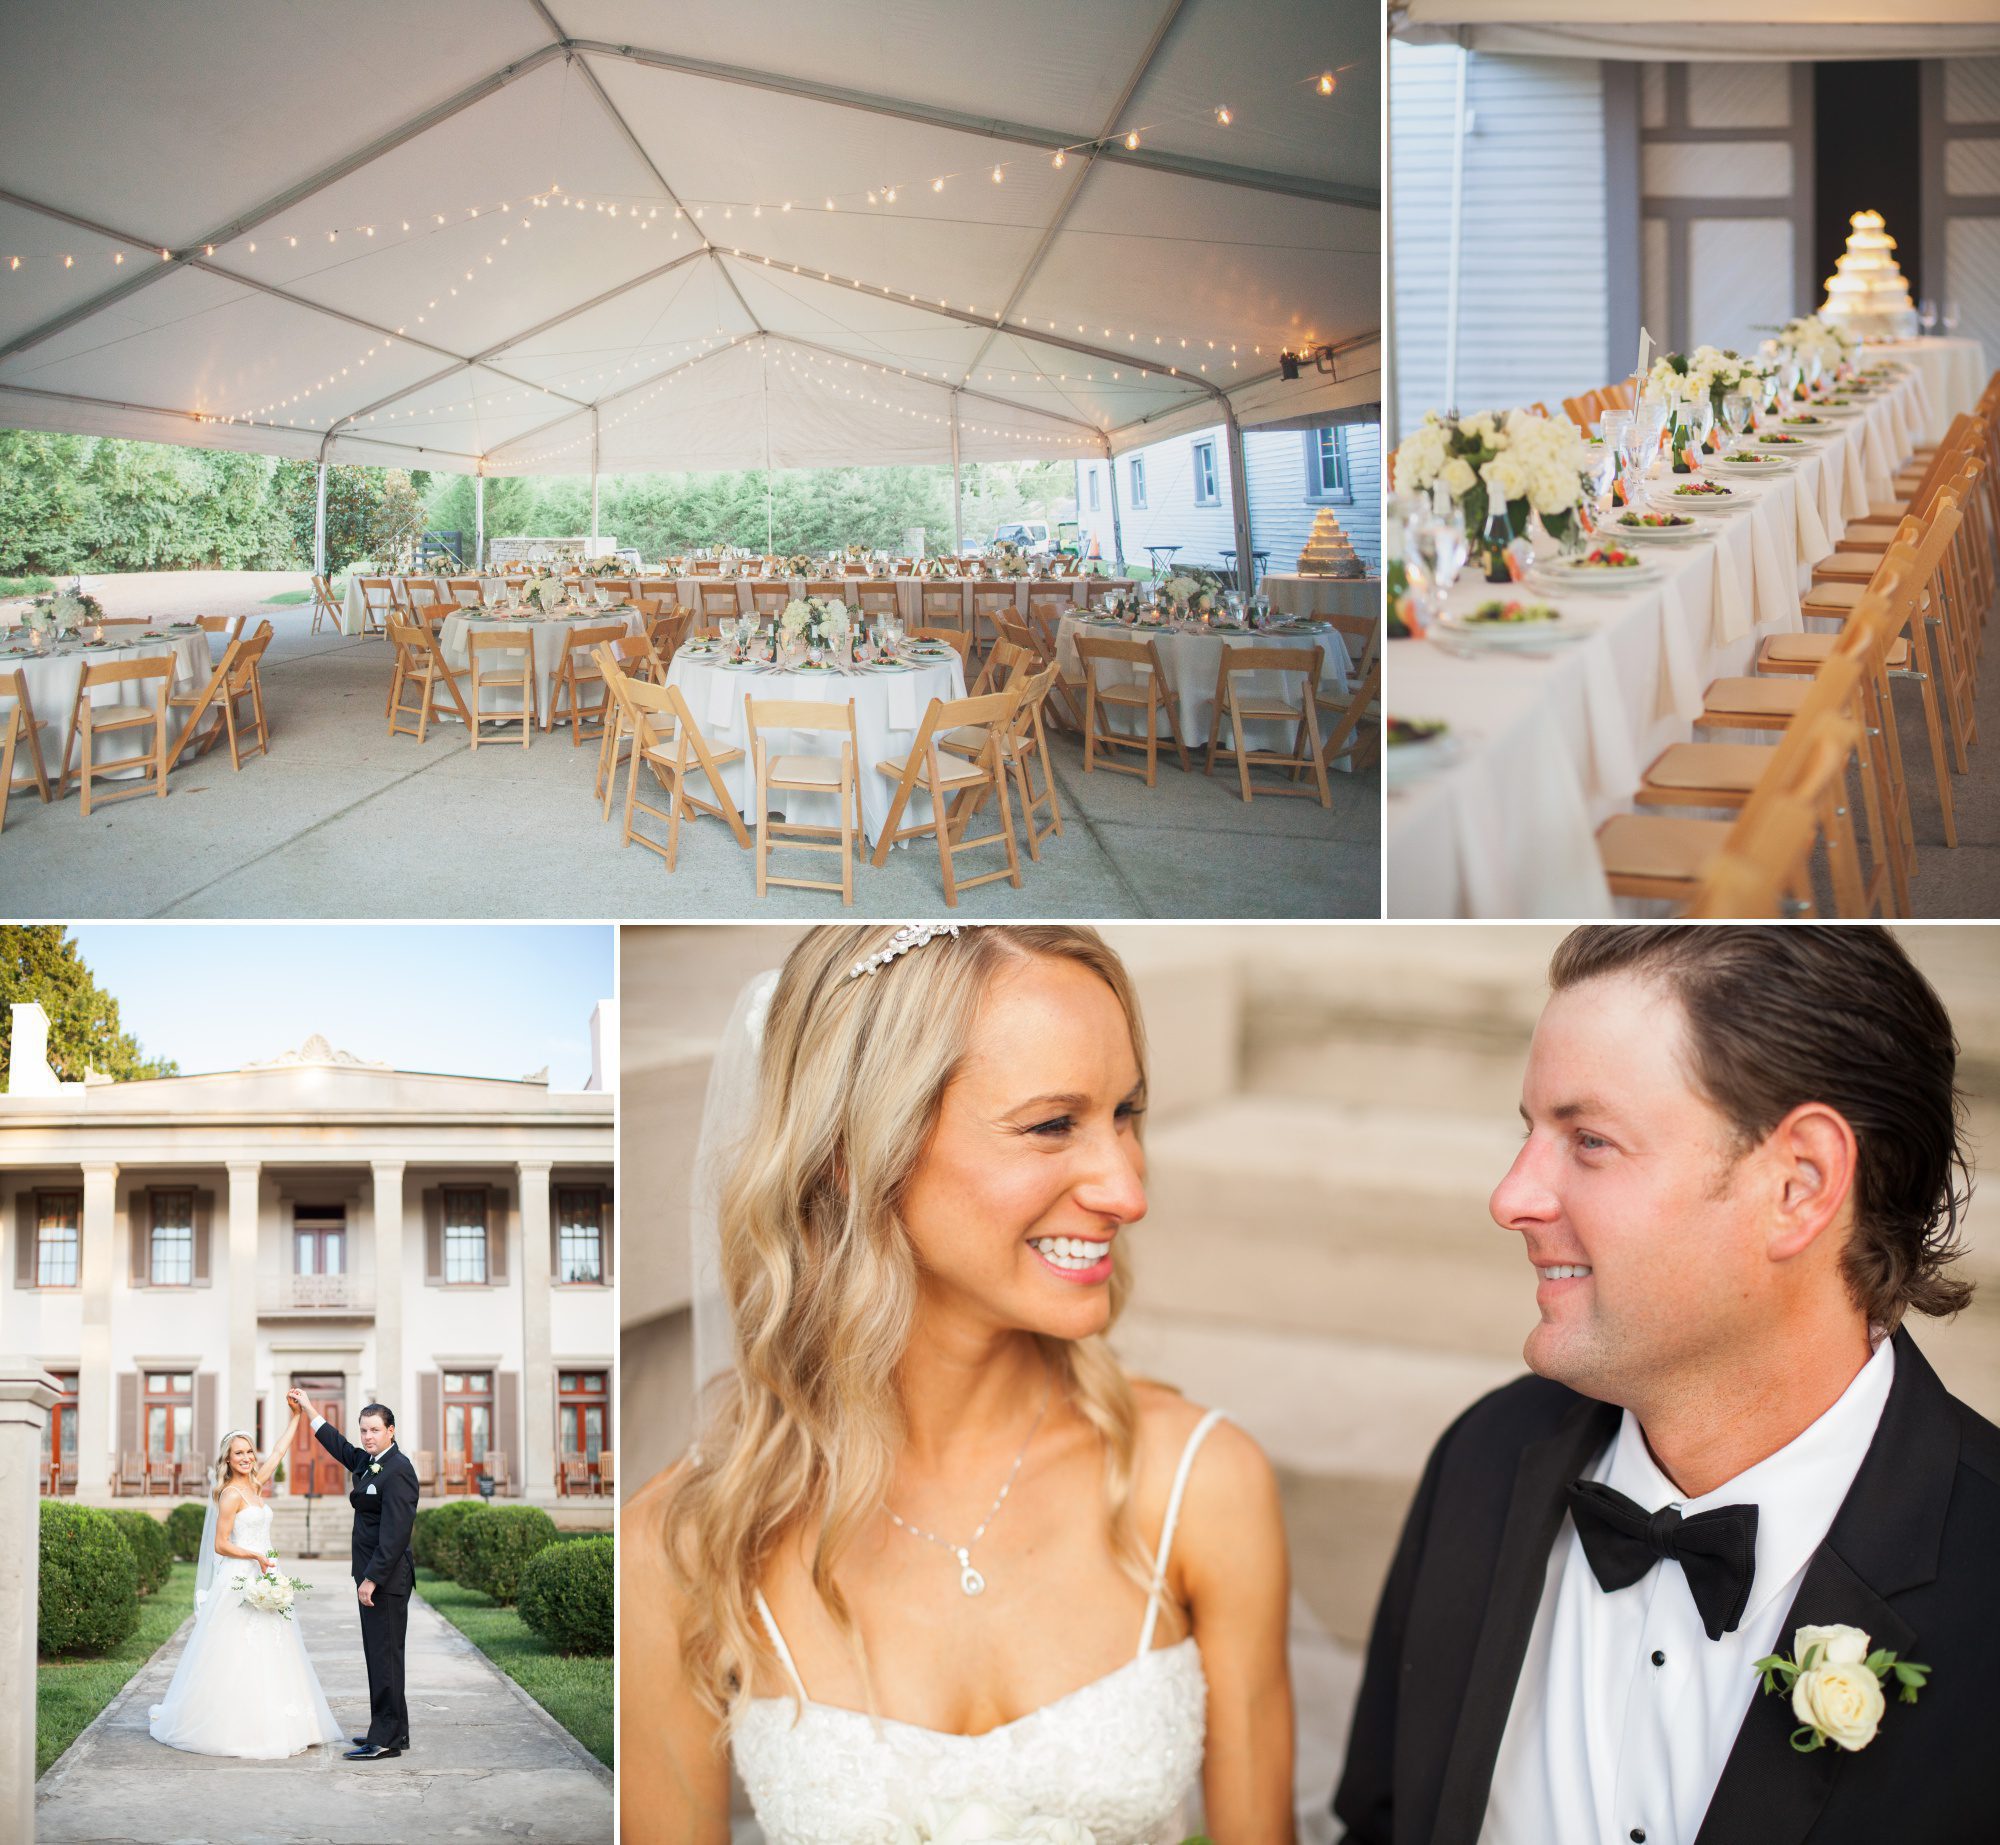 Reception tent and table decor before wedding reception at Belle Meade Plantation in Nashville, TN. Photos by Krista Lee Photography 